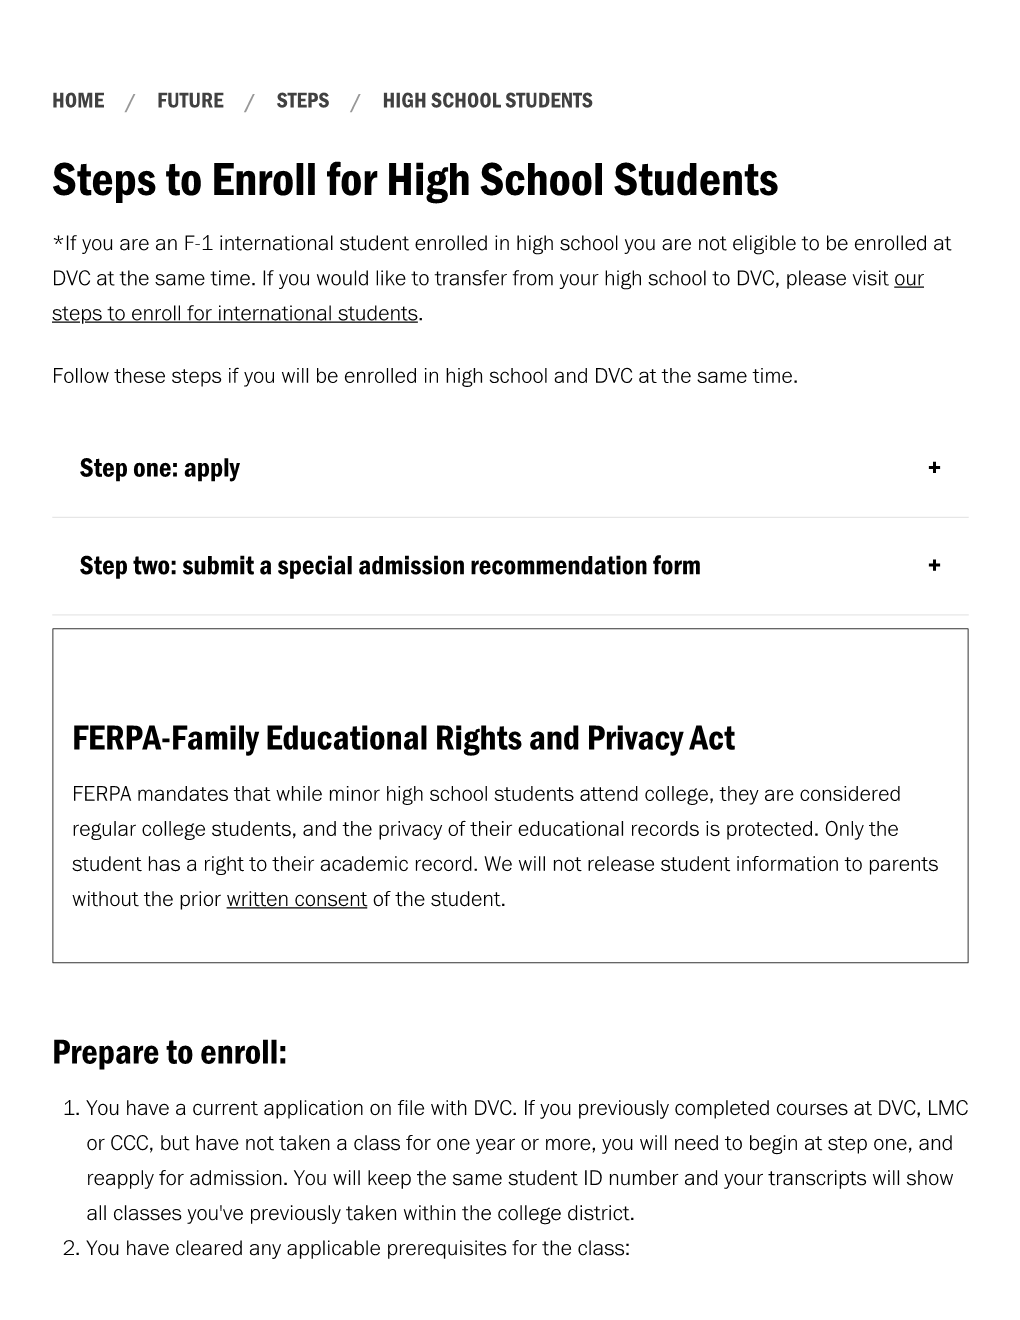 Steps to Enroll for High School Students